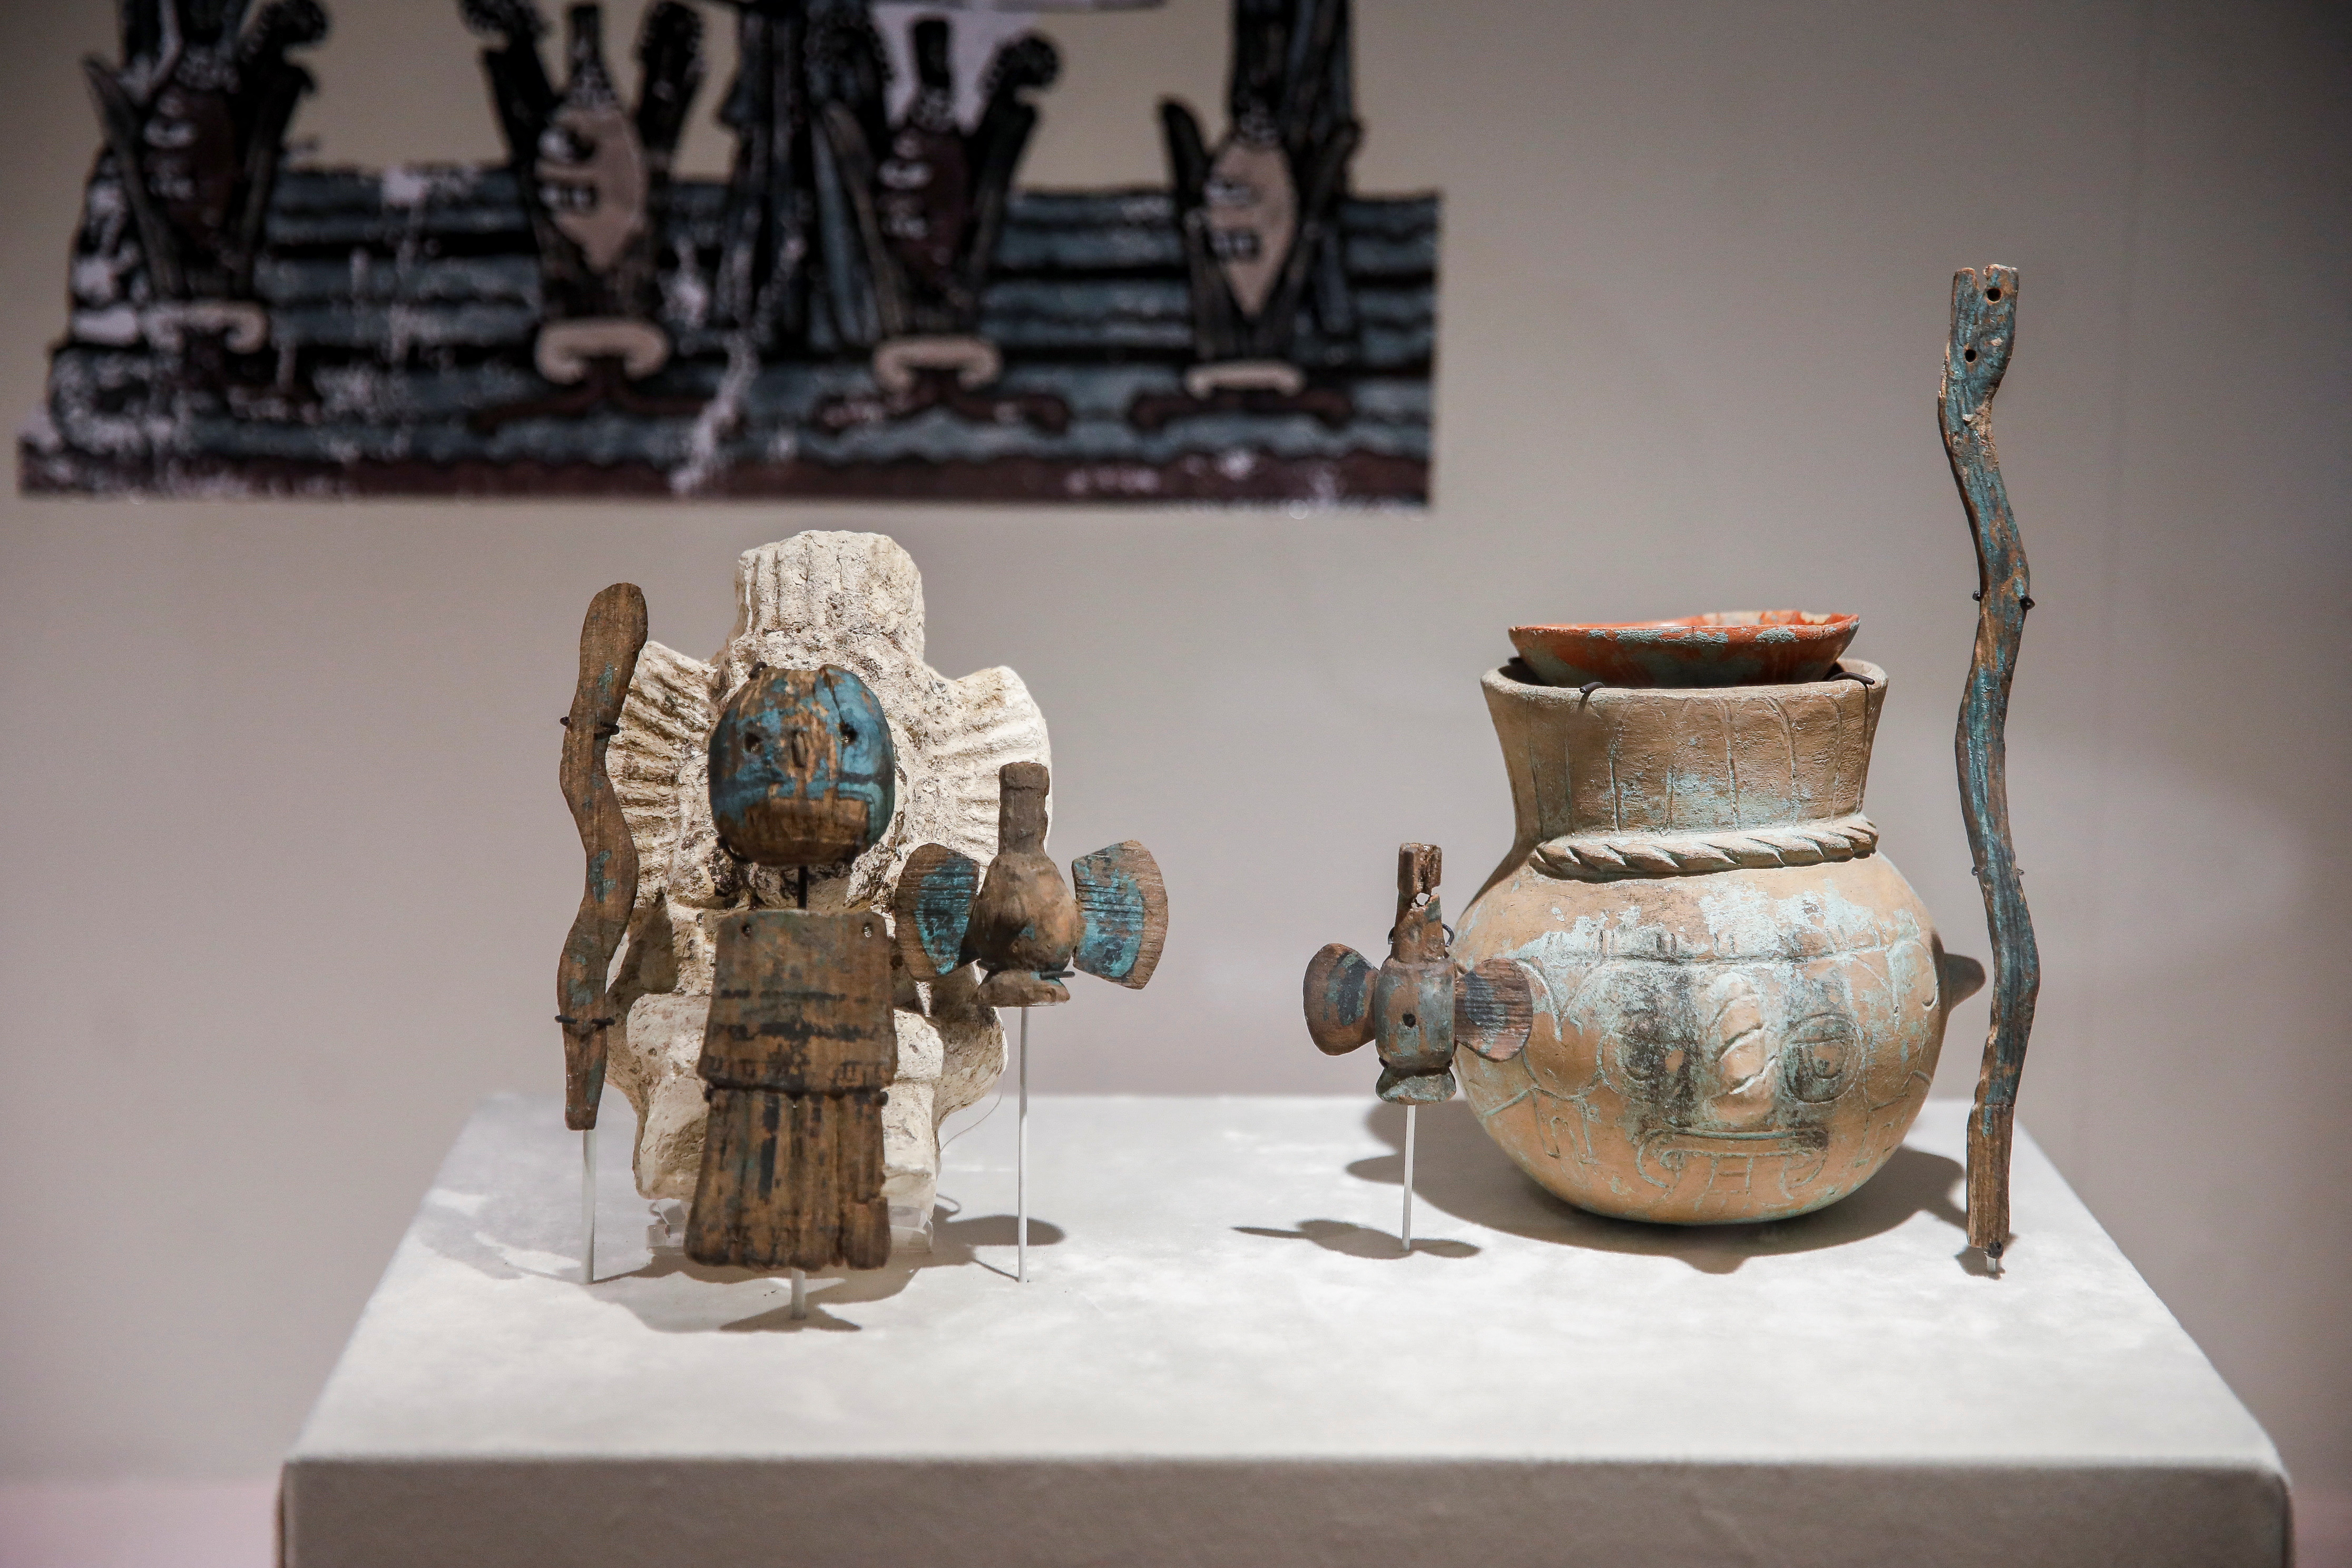 Templo Mayor Museum shows off rare ancient Aztec offerings carved from wood, in Mexico City